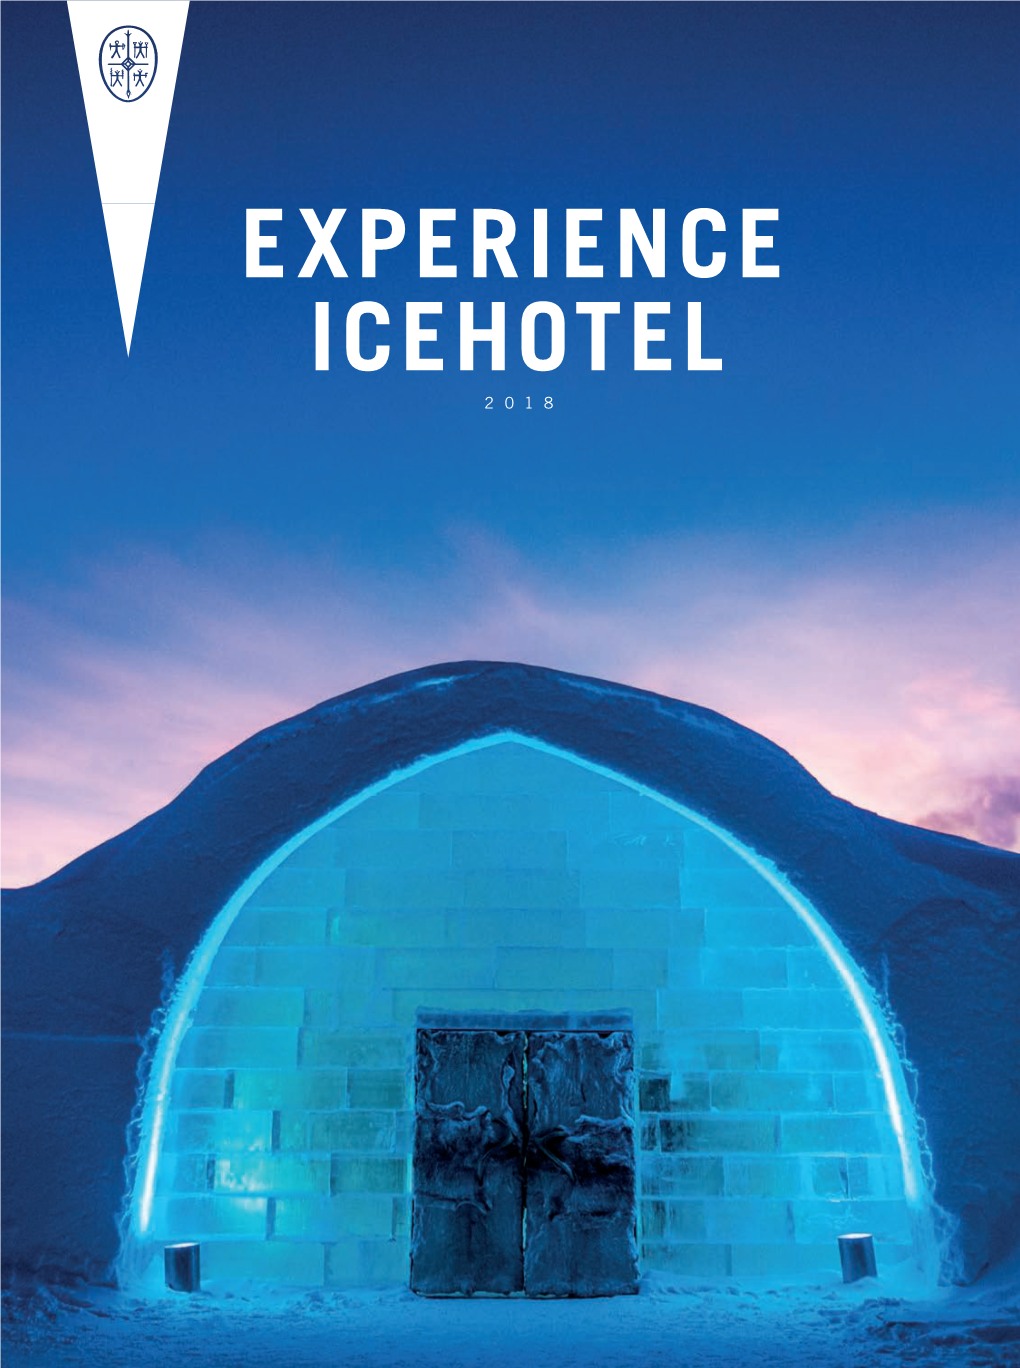 EXPERIENCE ICEHOTEL 2018 a Warm Welcome to a Cold Place